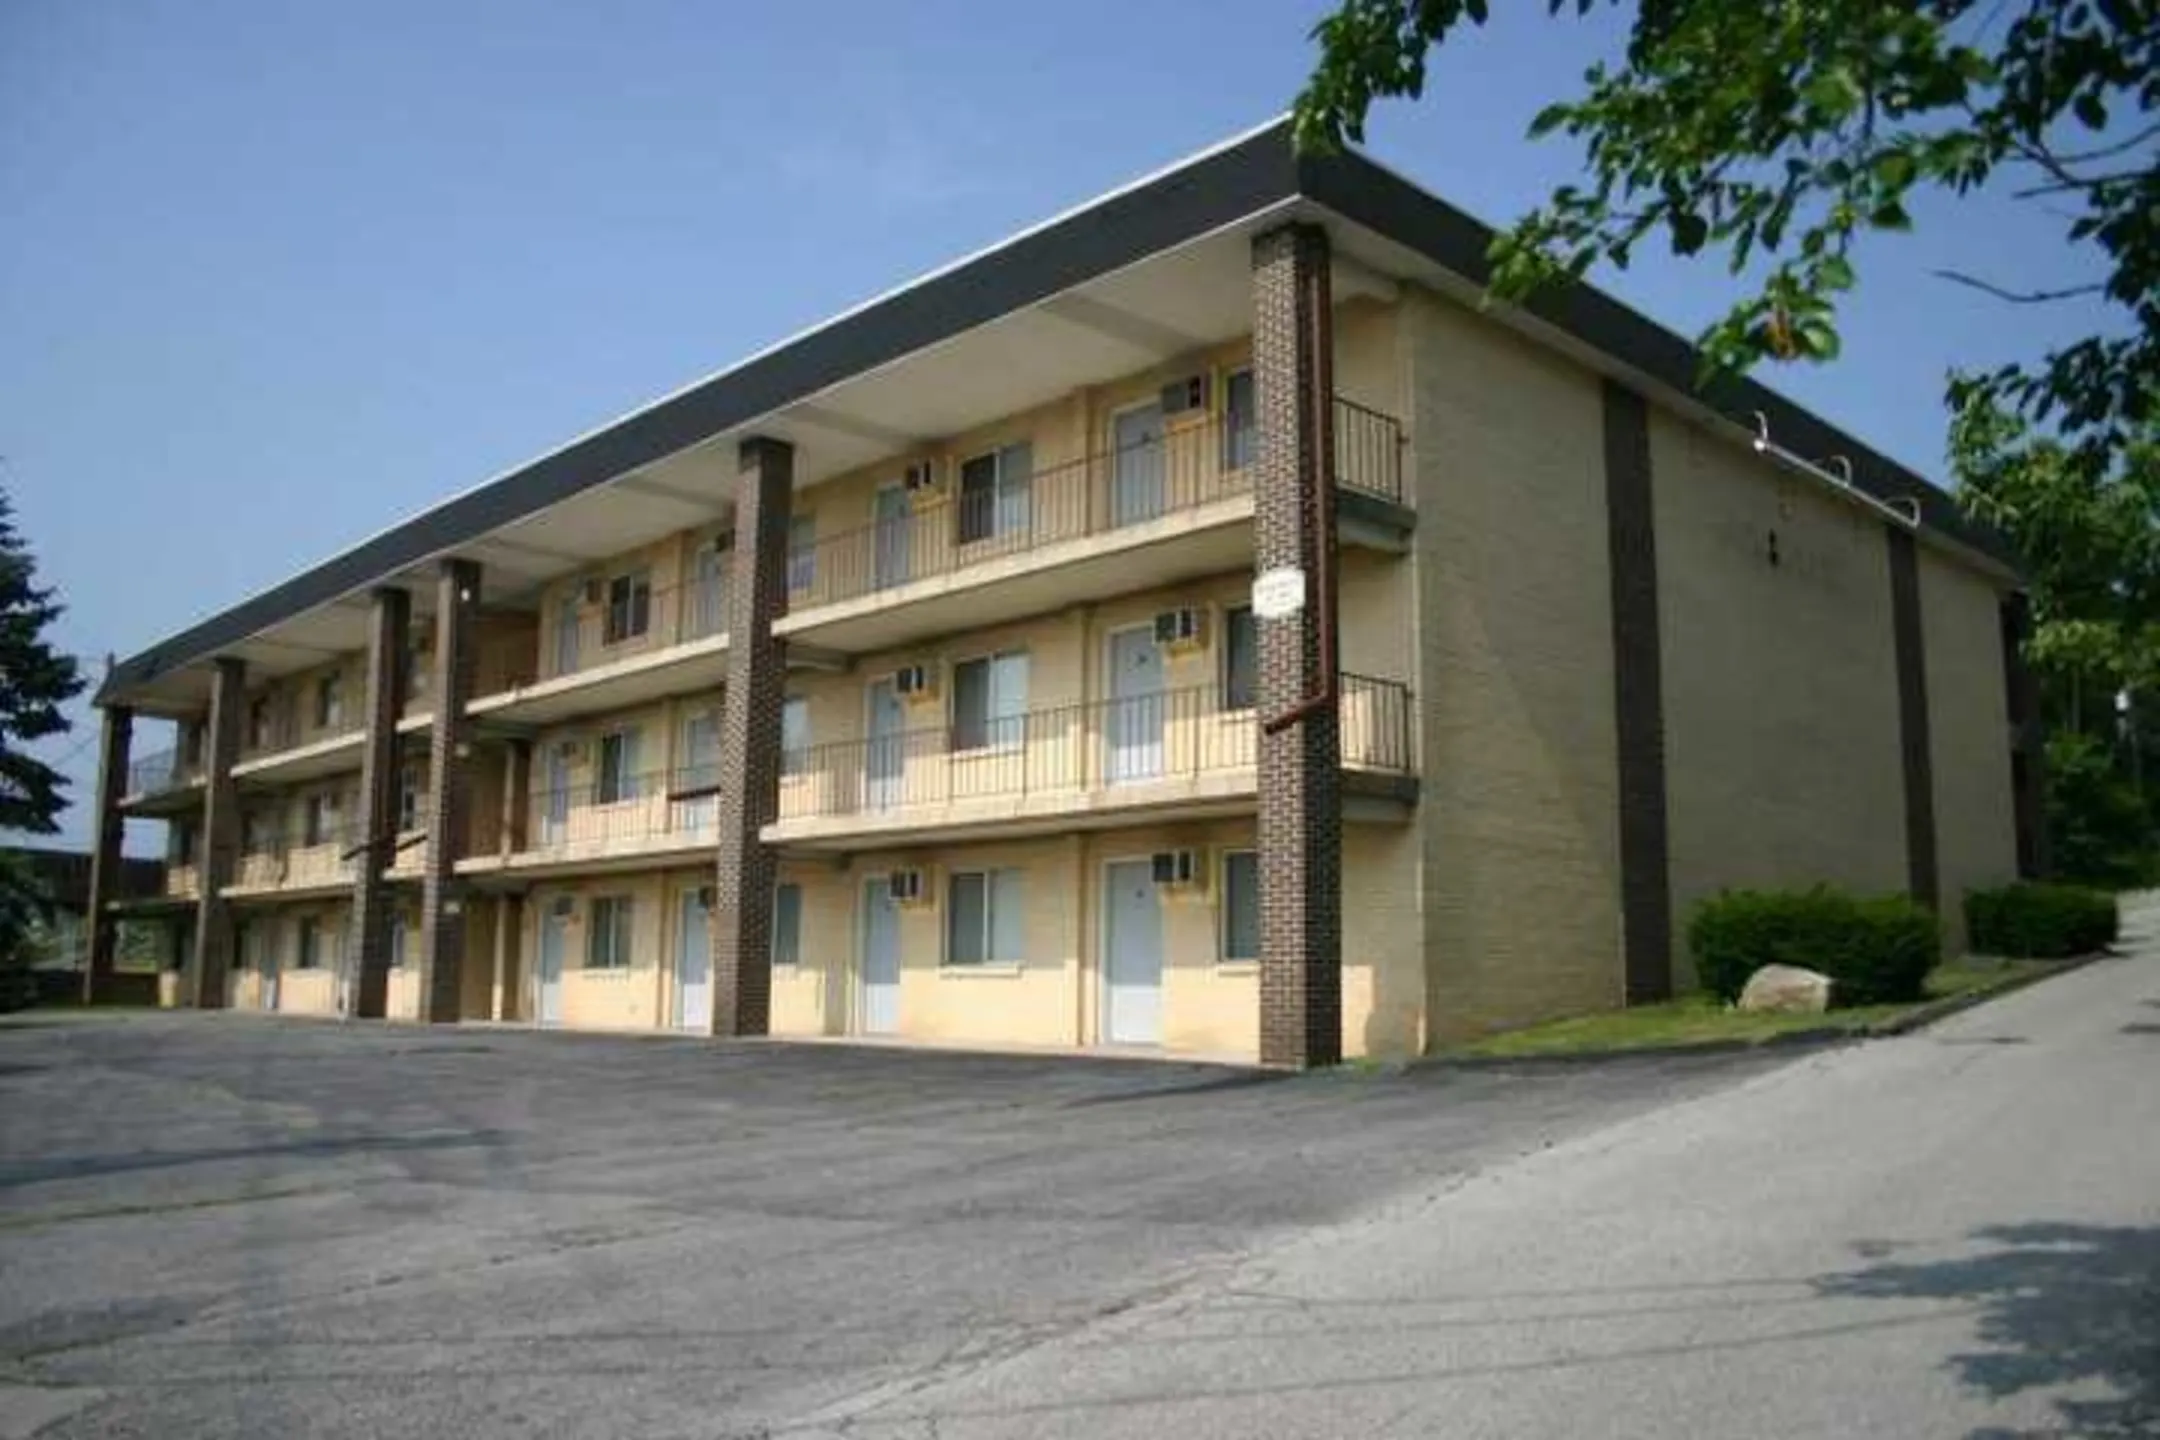 Building - Crestview Apartments - West Lafayette, IN